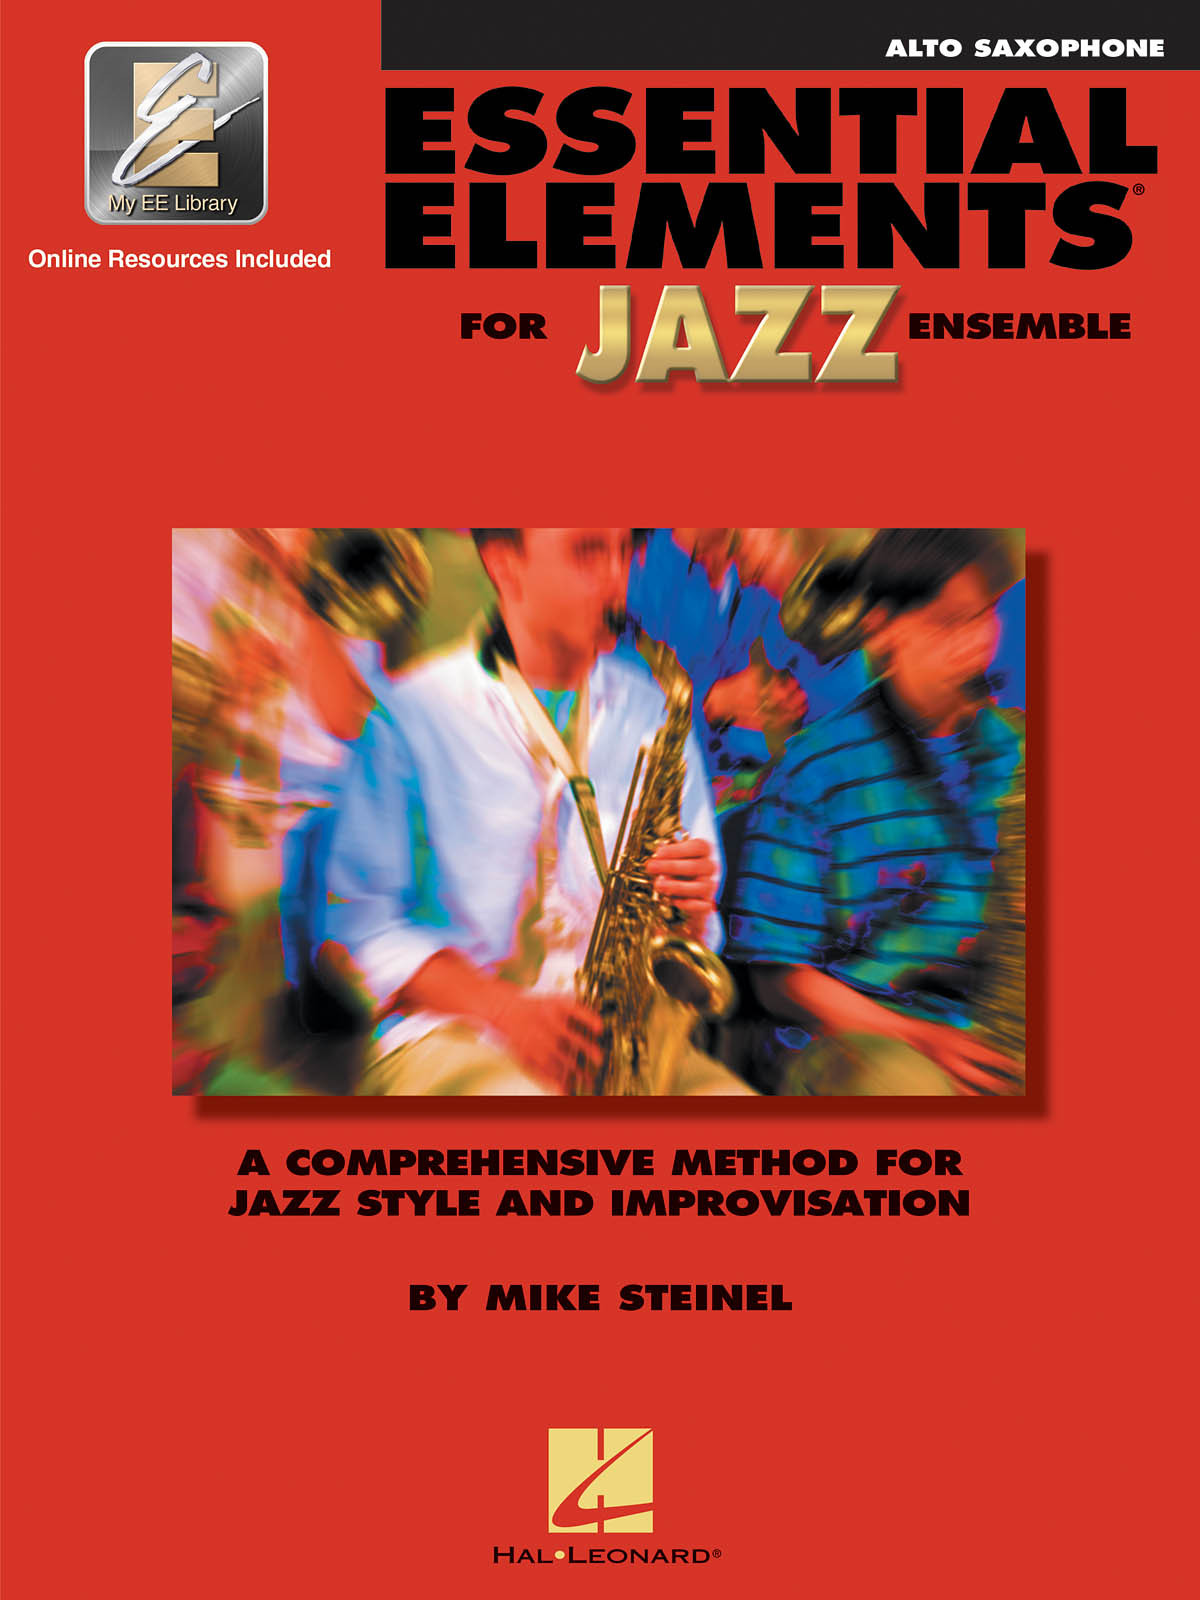 Essential Elements for Jazz...